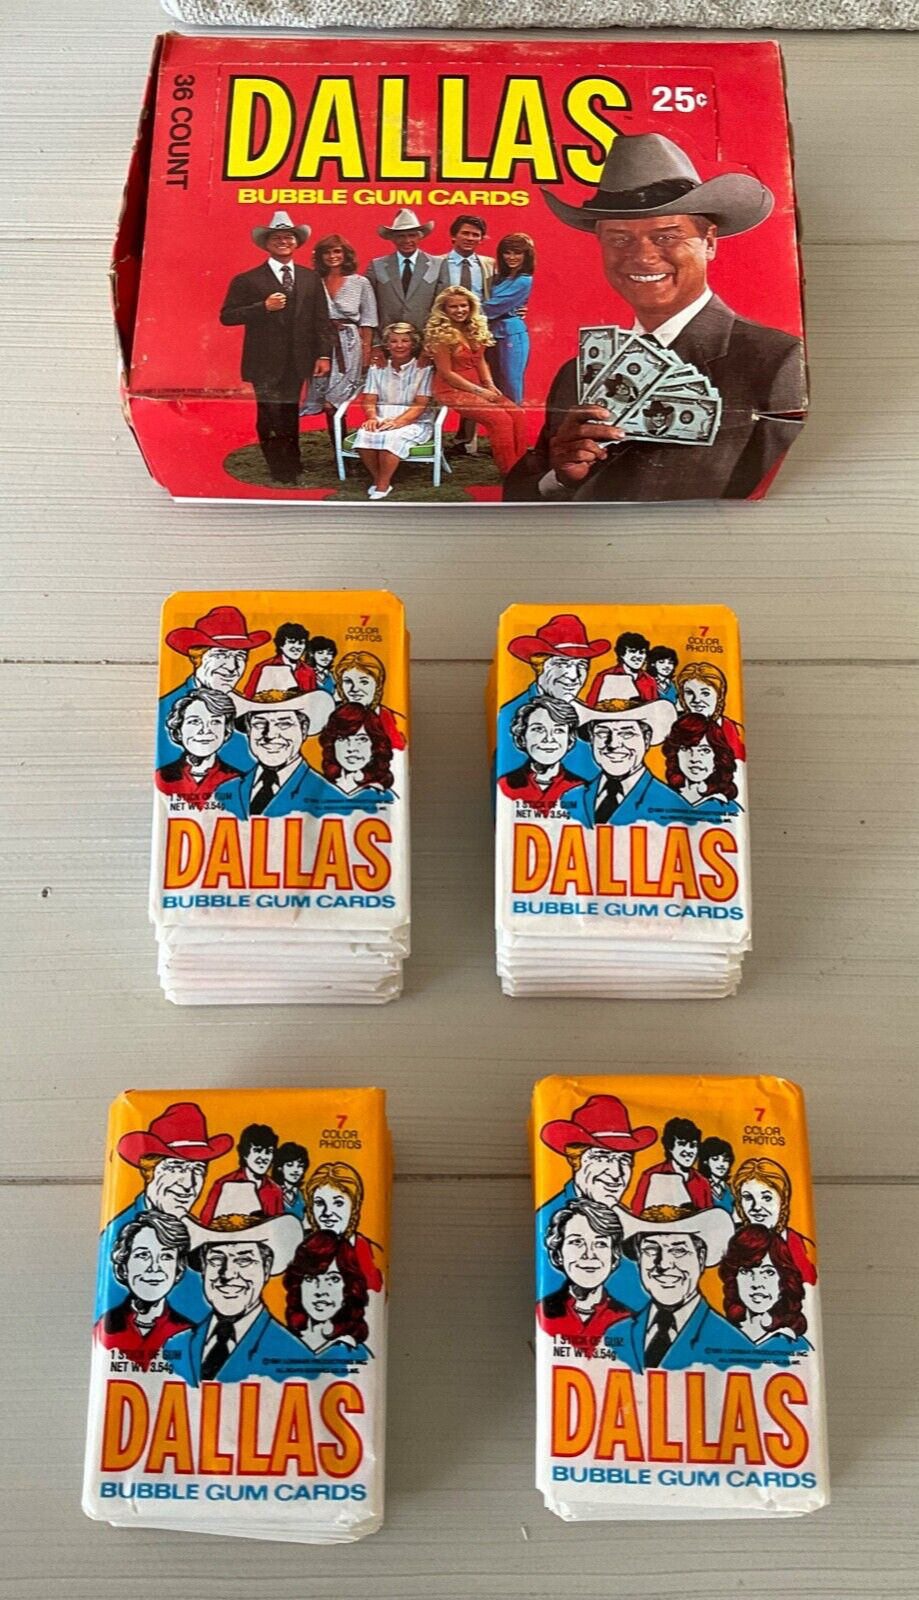 1981 Donruss DALLAS TV Show Trading Cards - Sealed Wax Pack